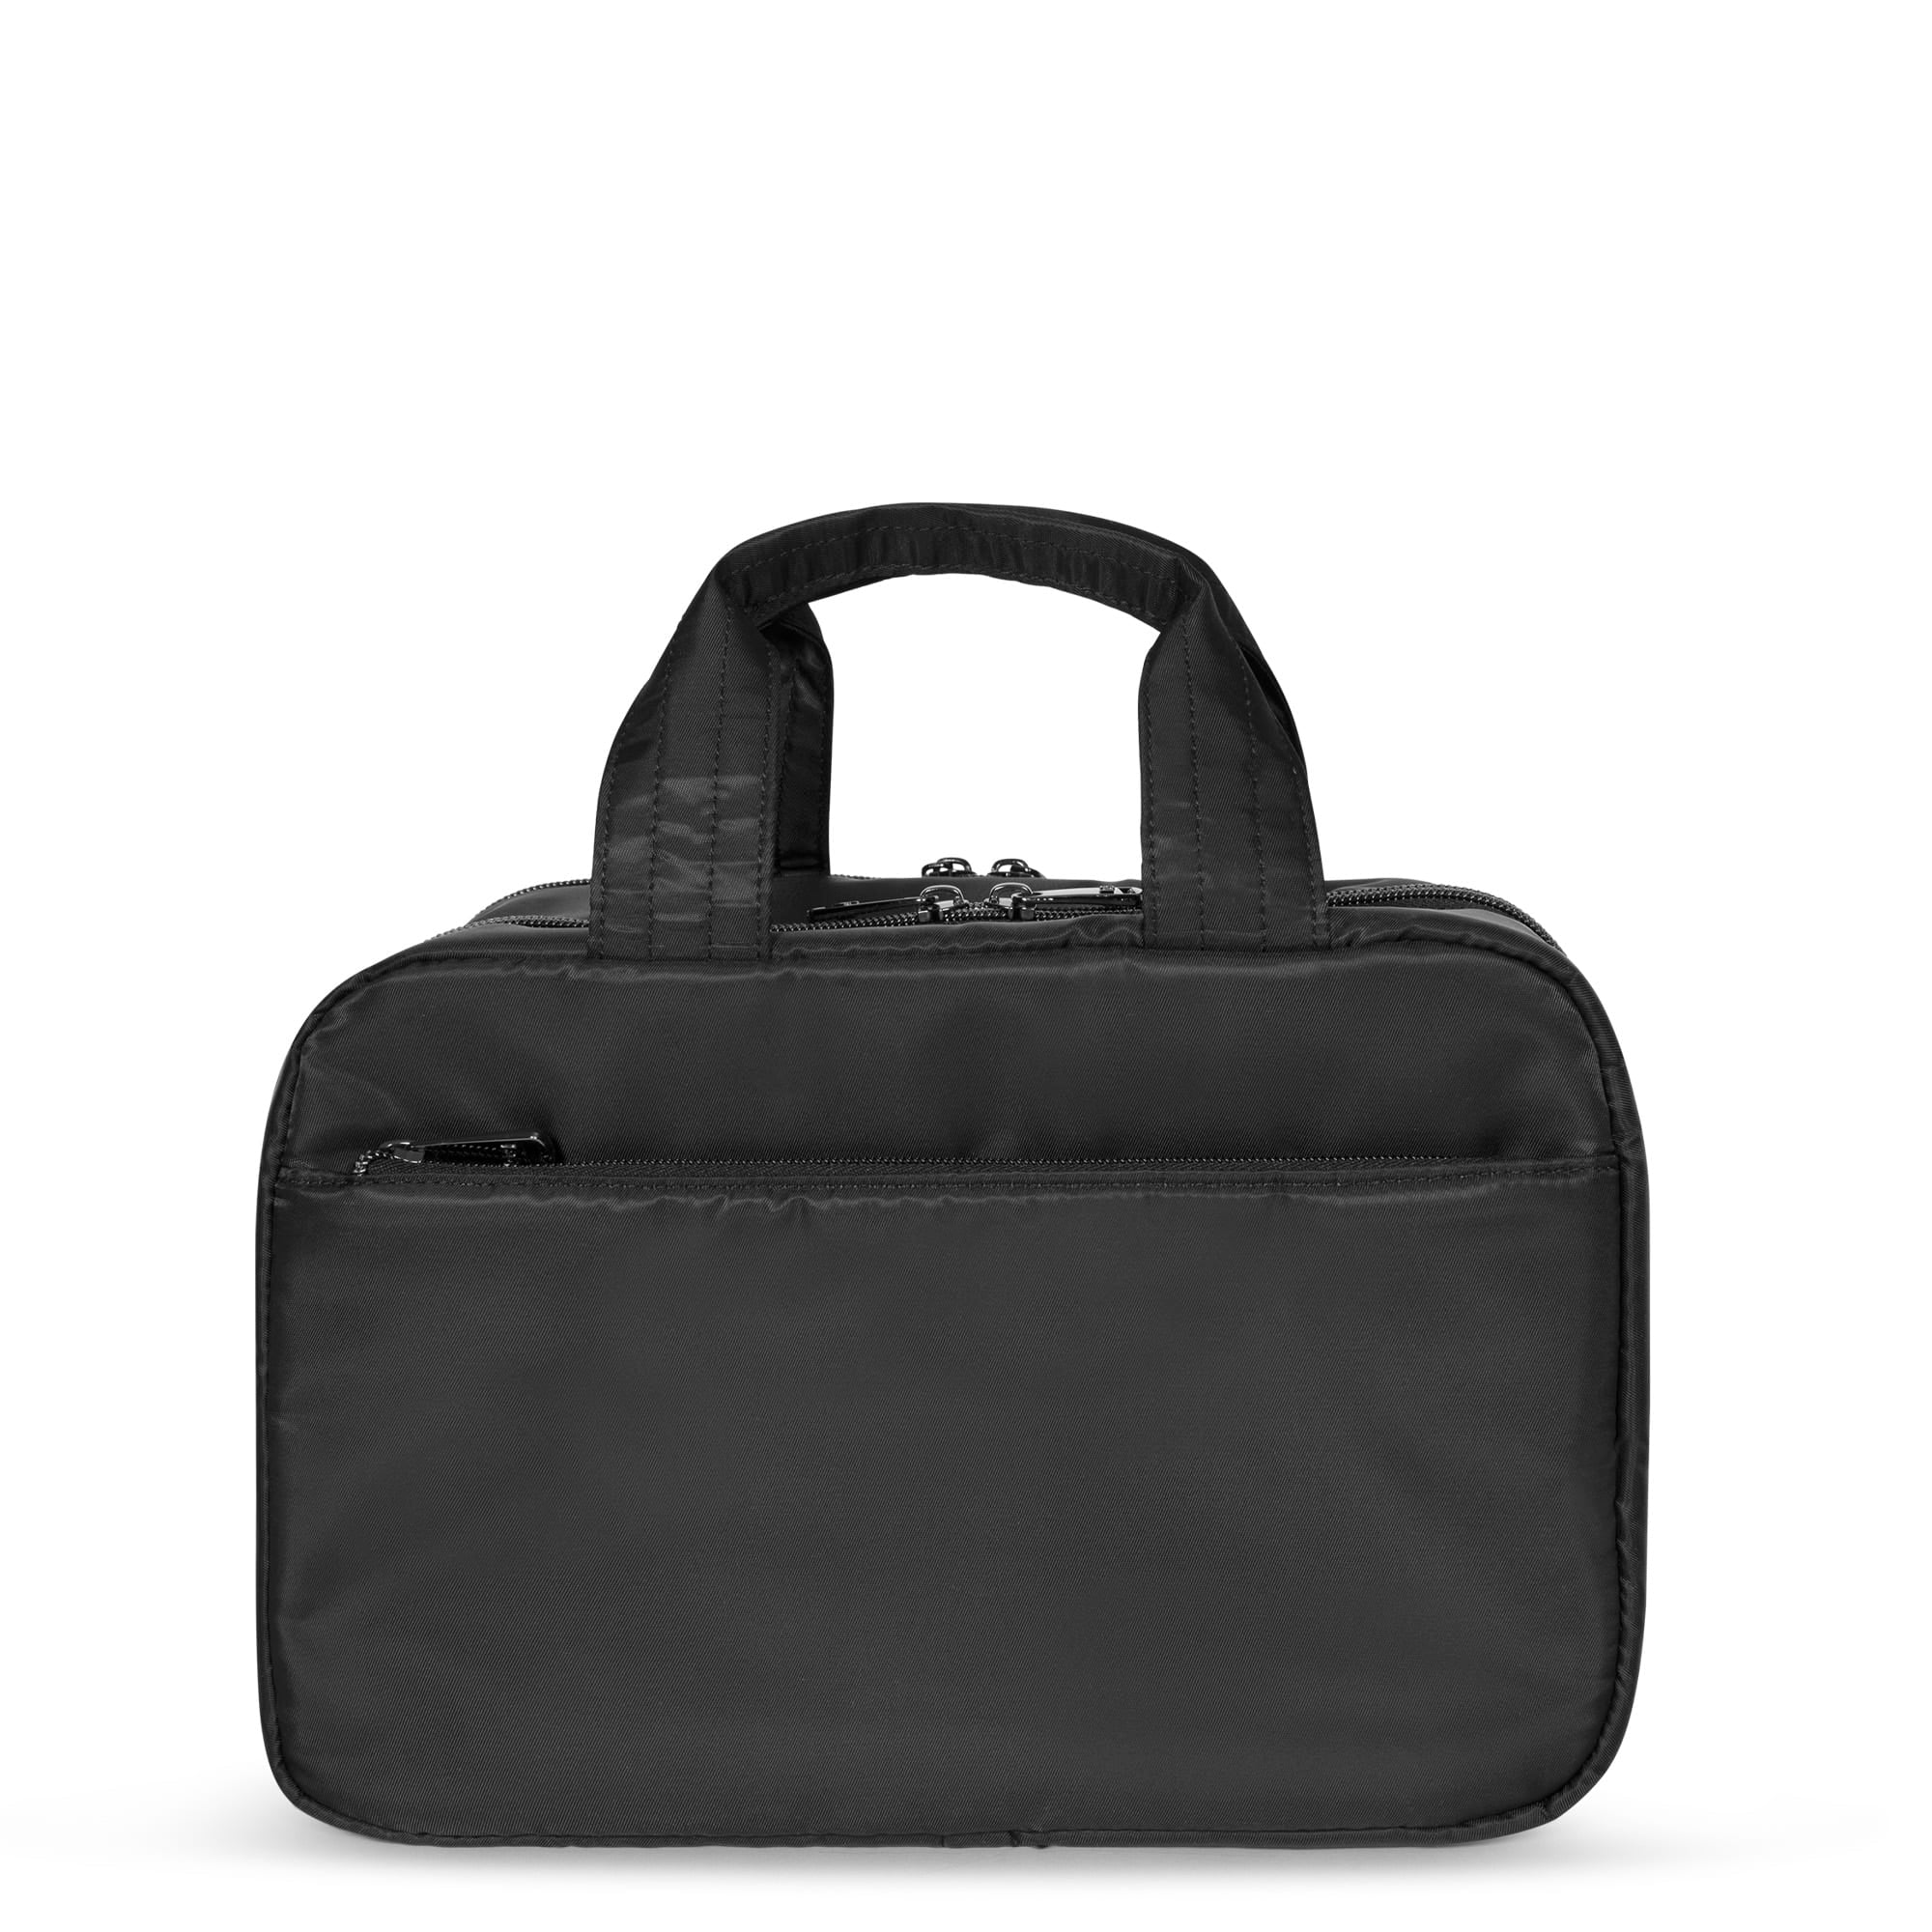 Flatbed Deluxe Cosmetic Case - Luglife.com